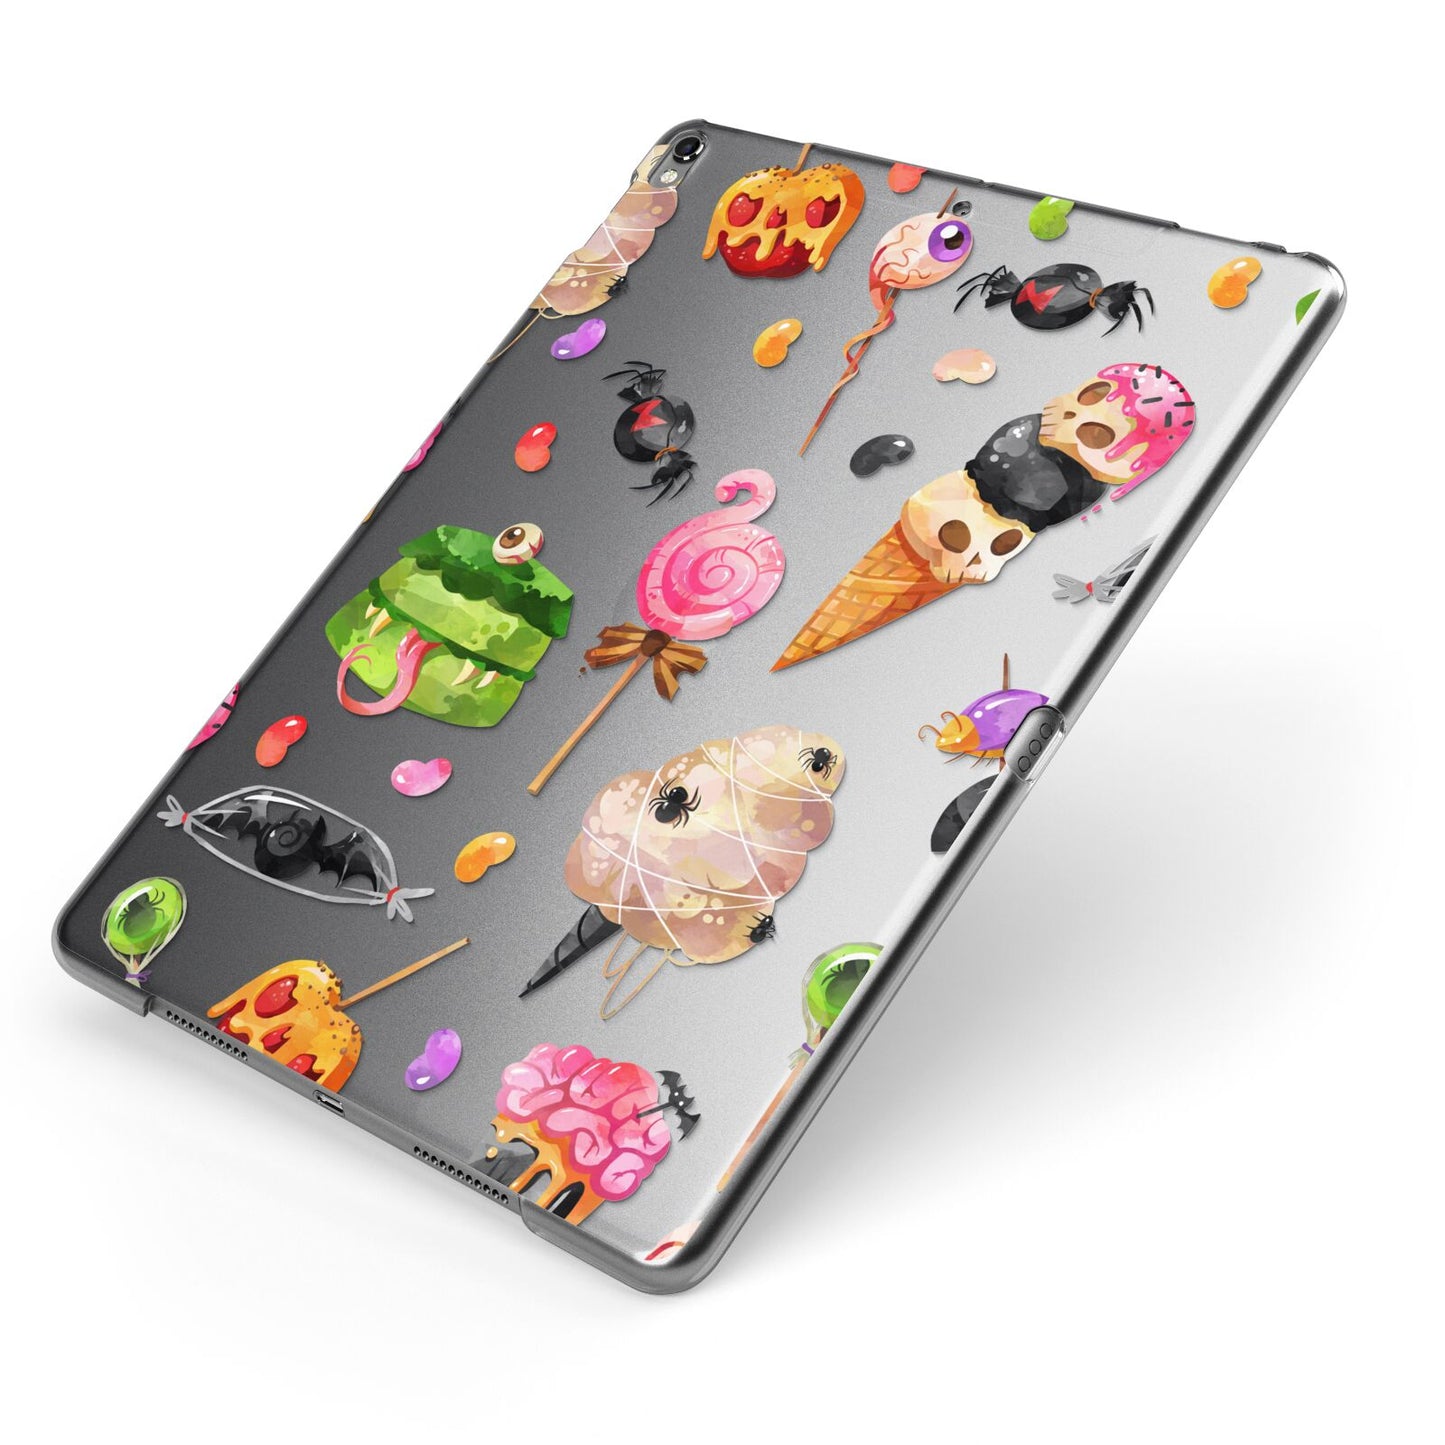 Halloween Cakes and Candy Apple iPad Case on Grey iPad Side View